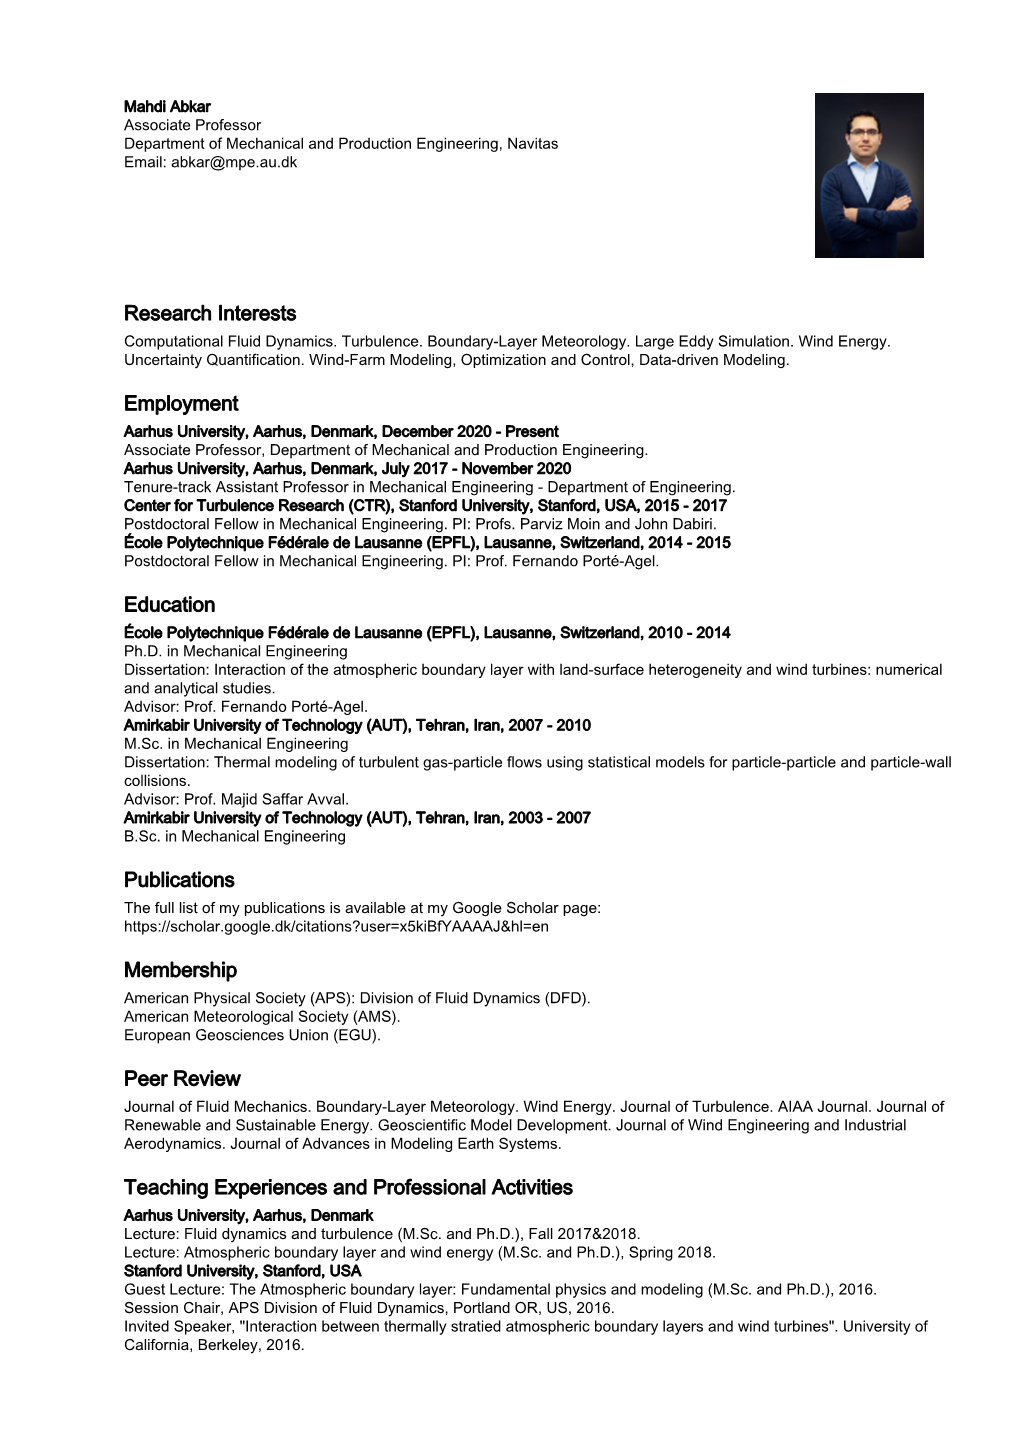 Research Interests Employment Education Publications